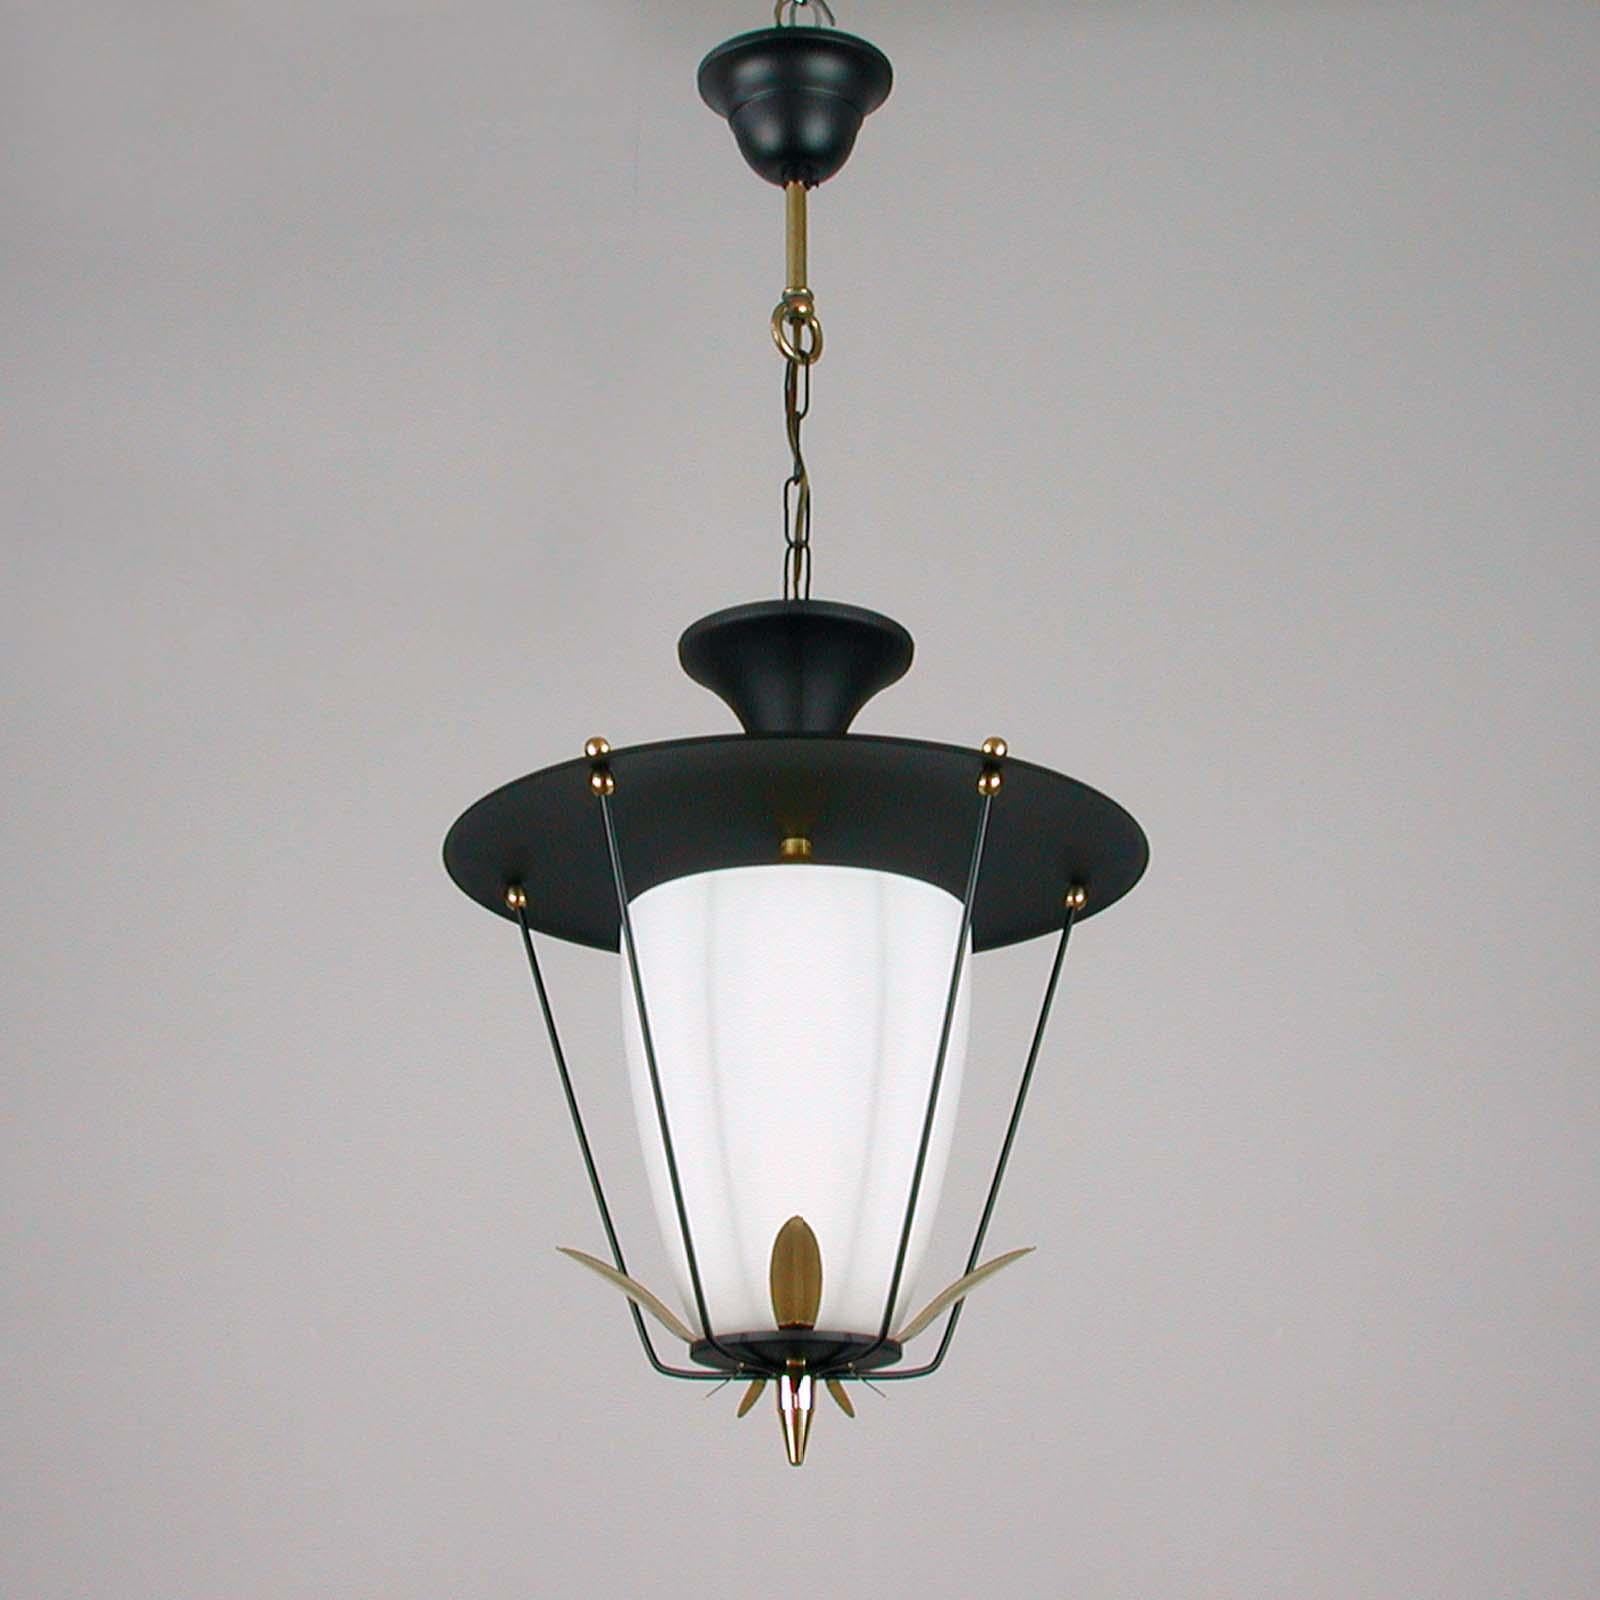 This vintage Maison Arlus / Lunel style lantern / ceiling light was designed and manufactured in France in the 1950s. It features a black lacquered metal lampshade, black case with a white frosted glass diffuser and brass details. 

The lantern